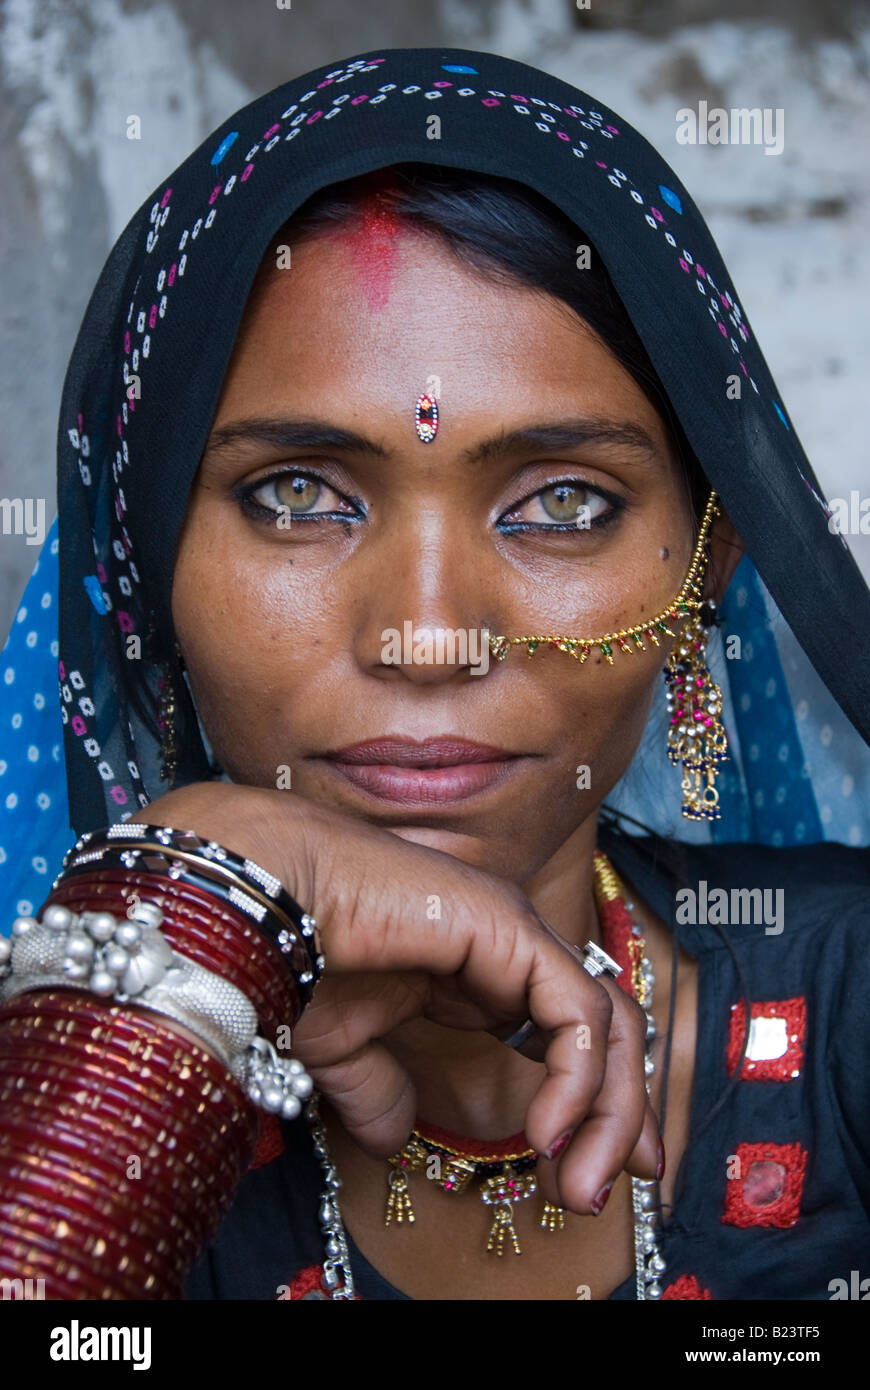 Portrait of a beautiful, traditionally dressed Indian woman from the Thar desert in Rajasthan (India) Stock Photo